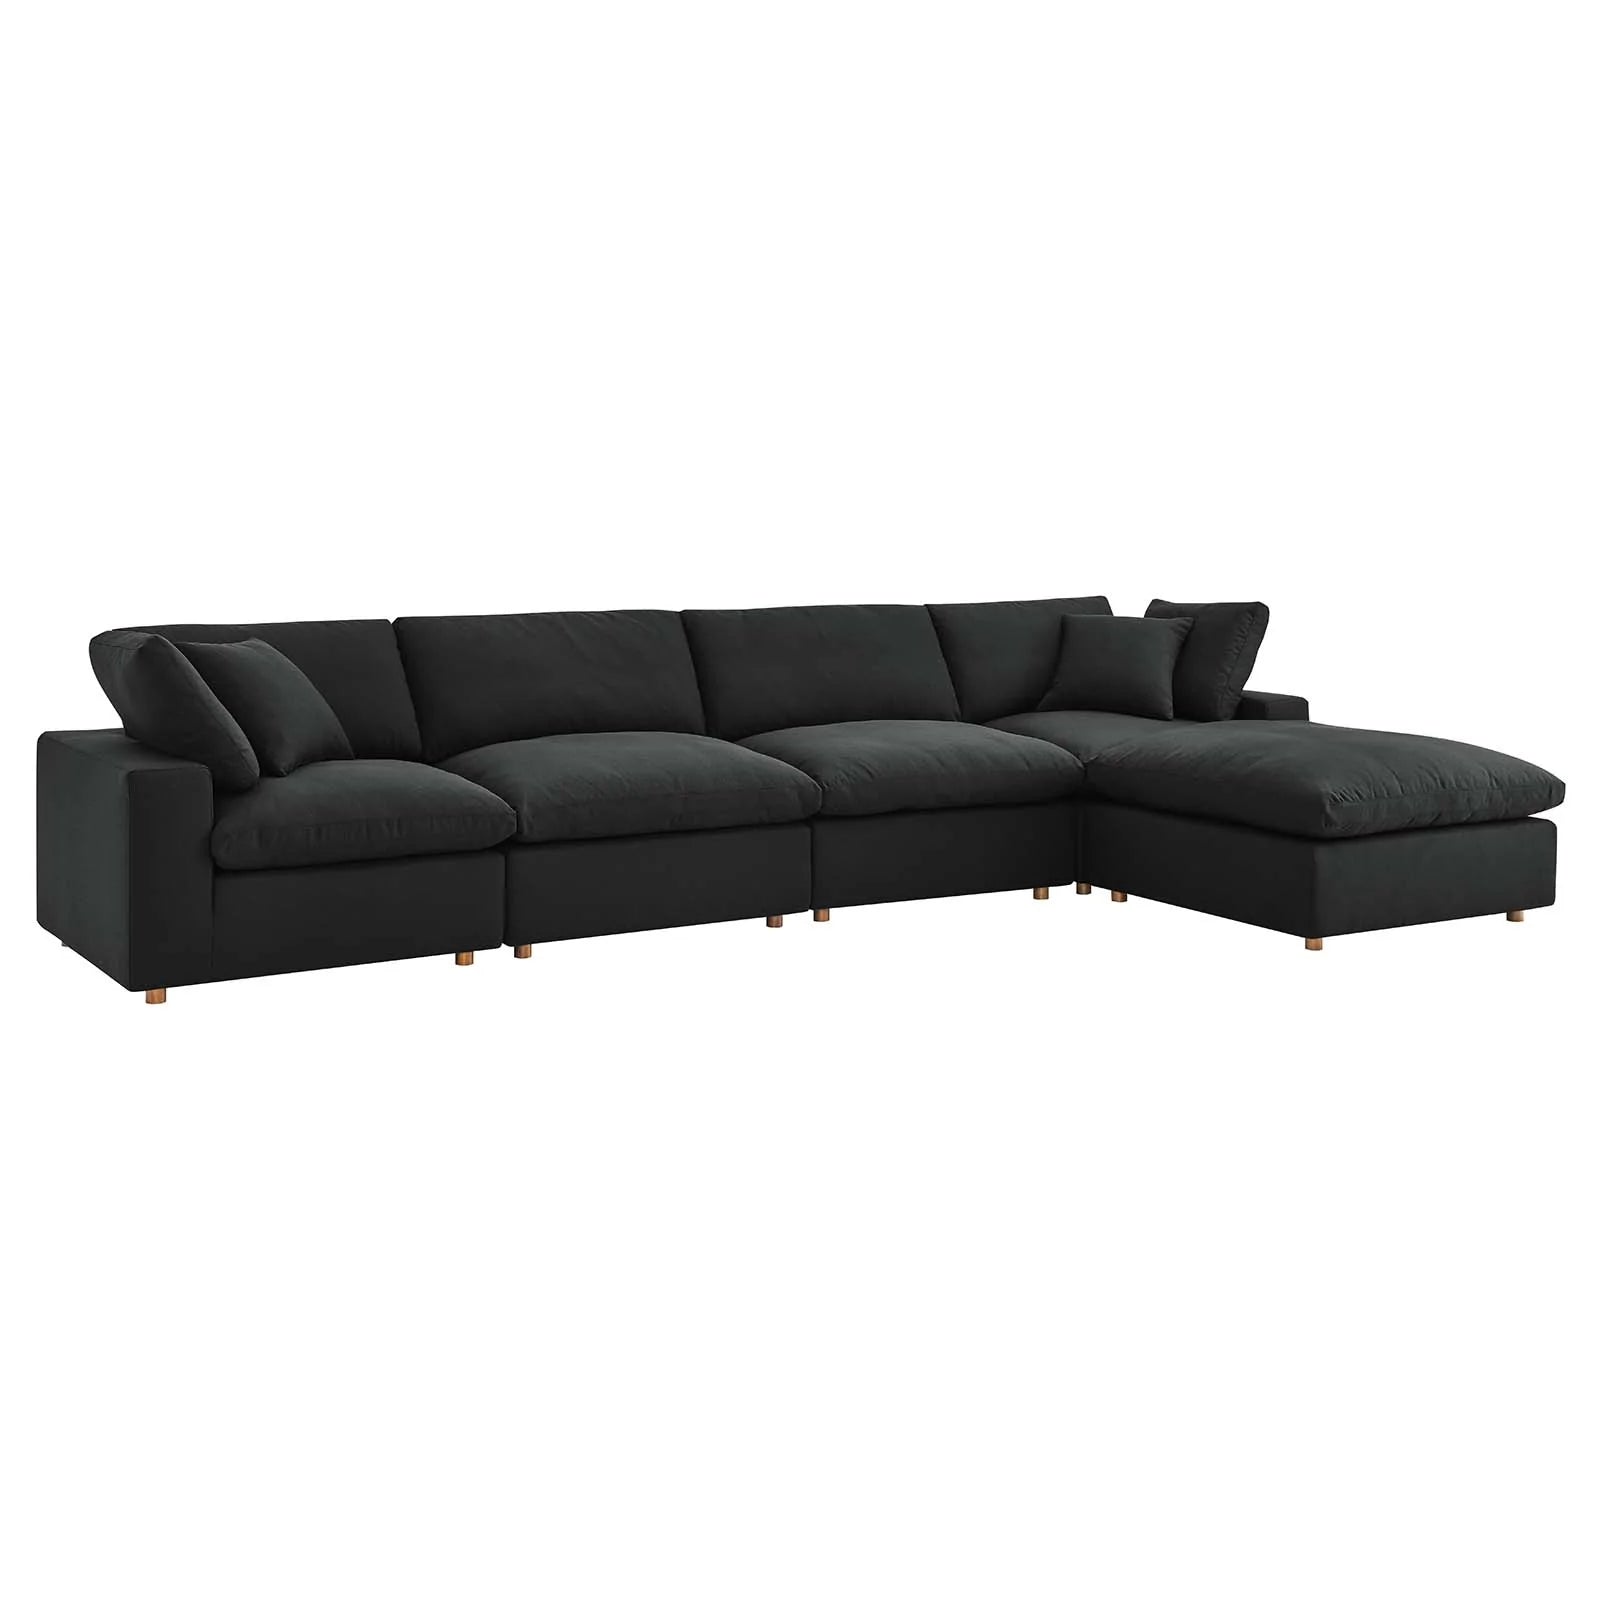 Cozy Collection Plush Modular 5 Piece Extended Sectional